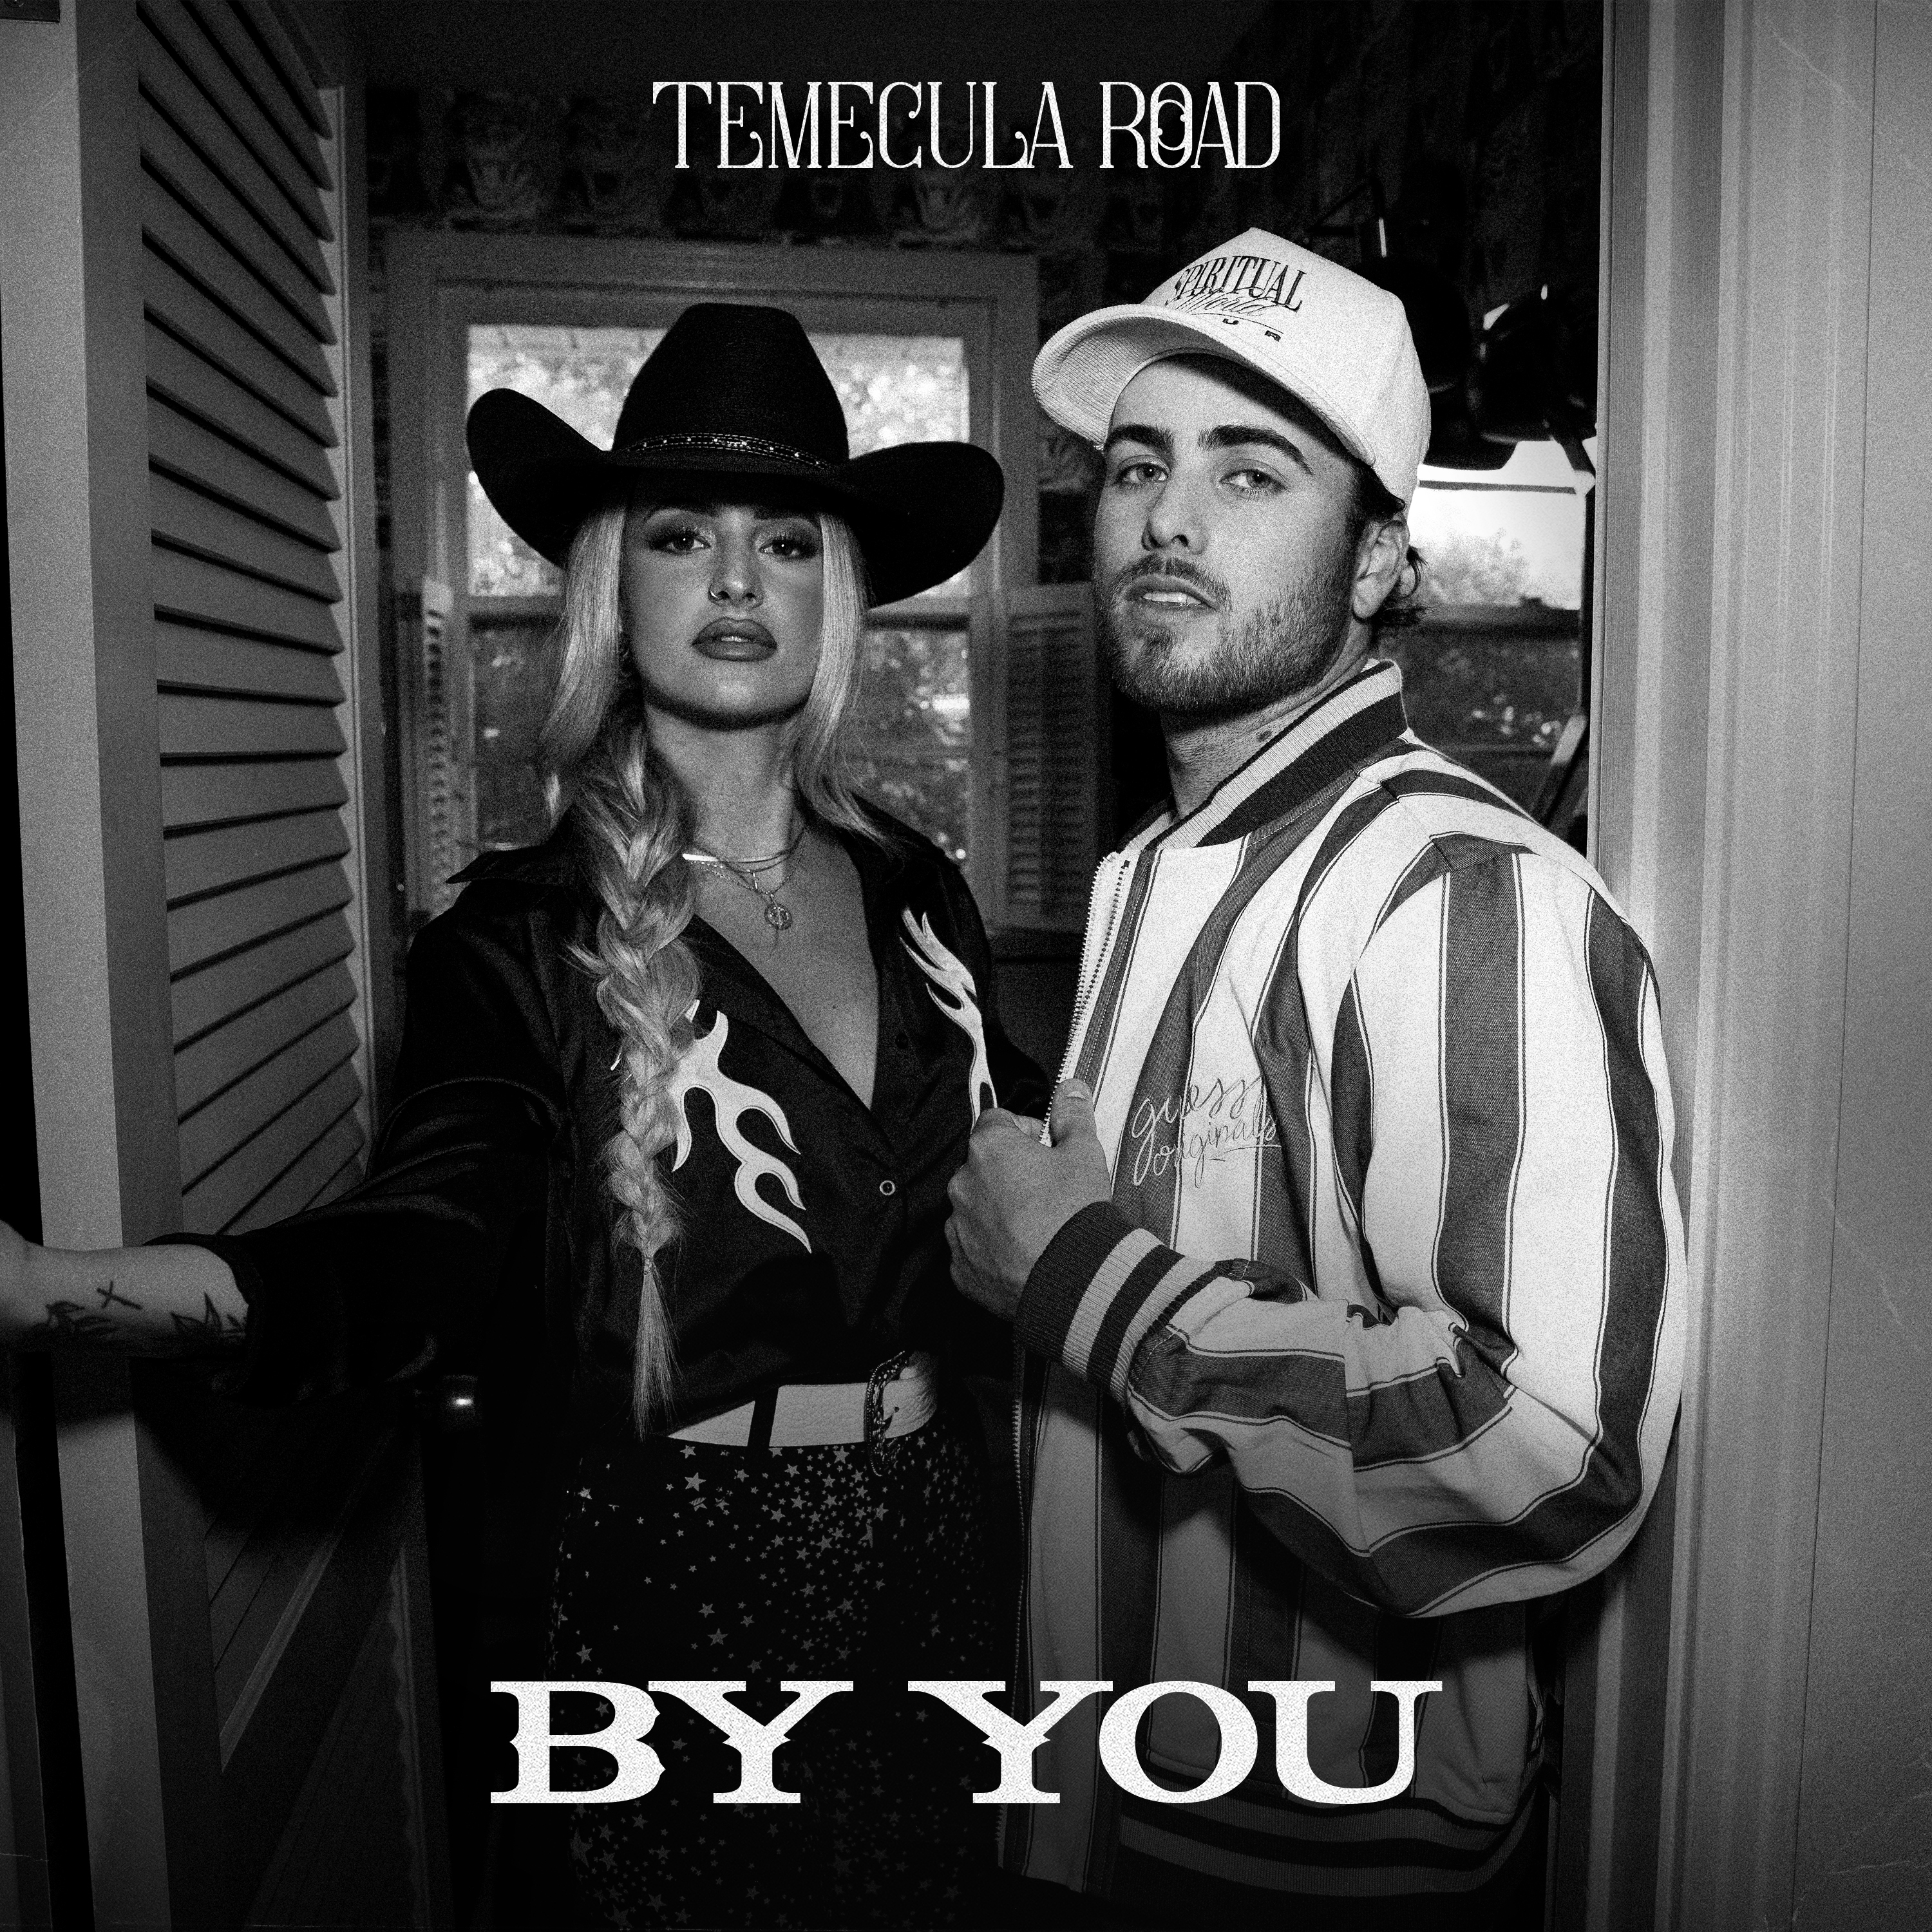 TEMECULA ROAD RELEASES CAJUN-SPICED NEW SONG “BY YOU”